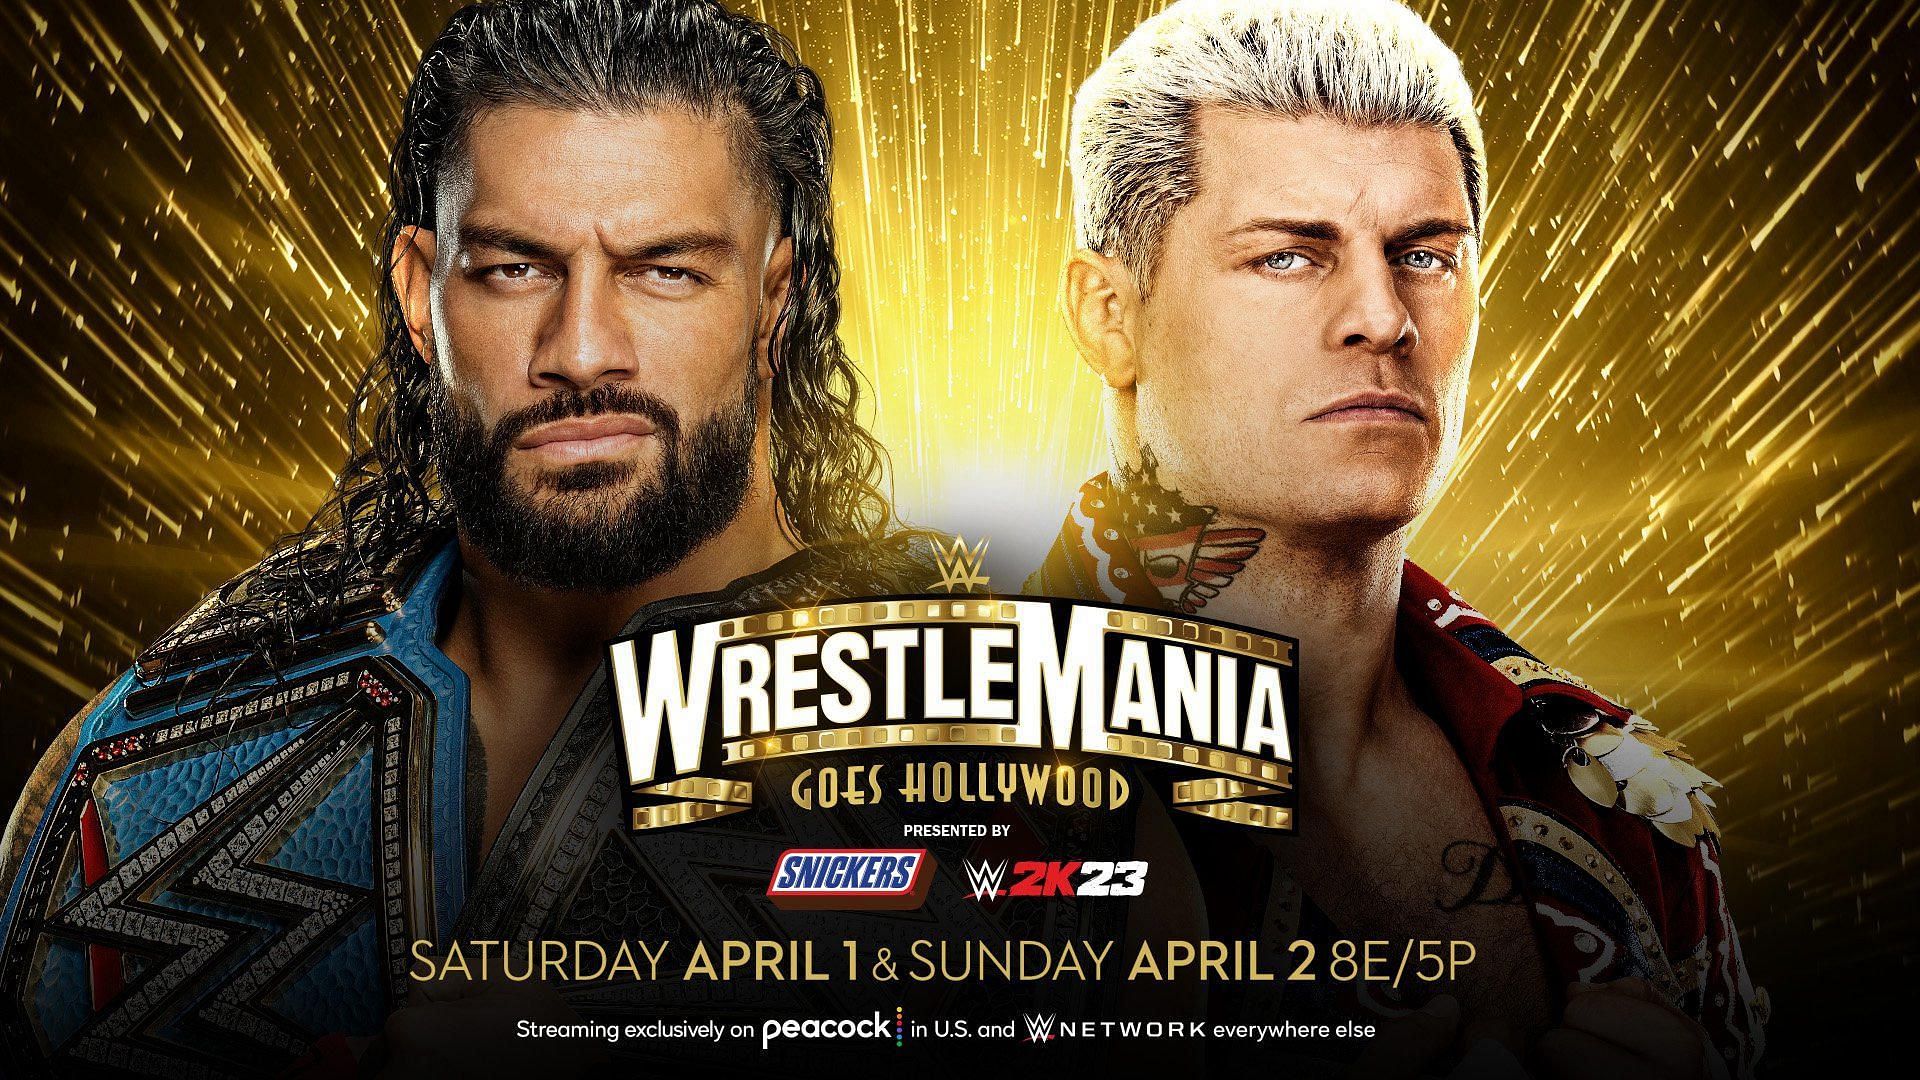 The time is right for a title change at WrestleMania 39.